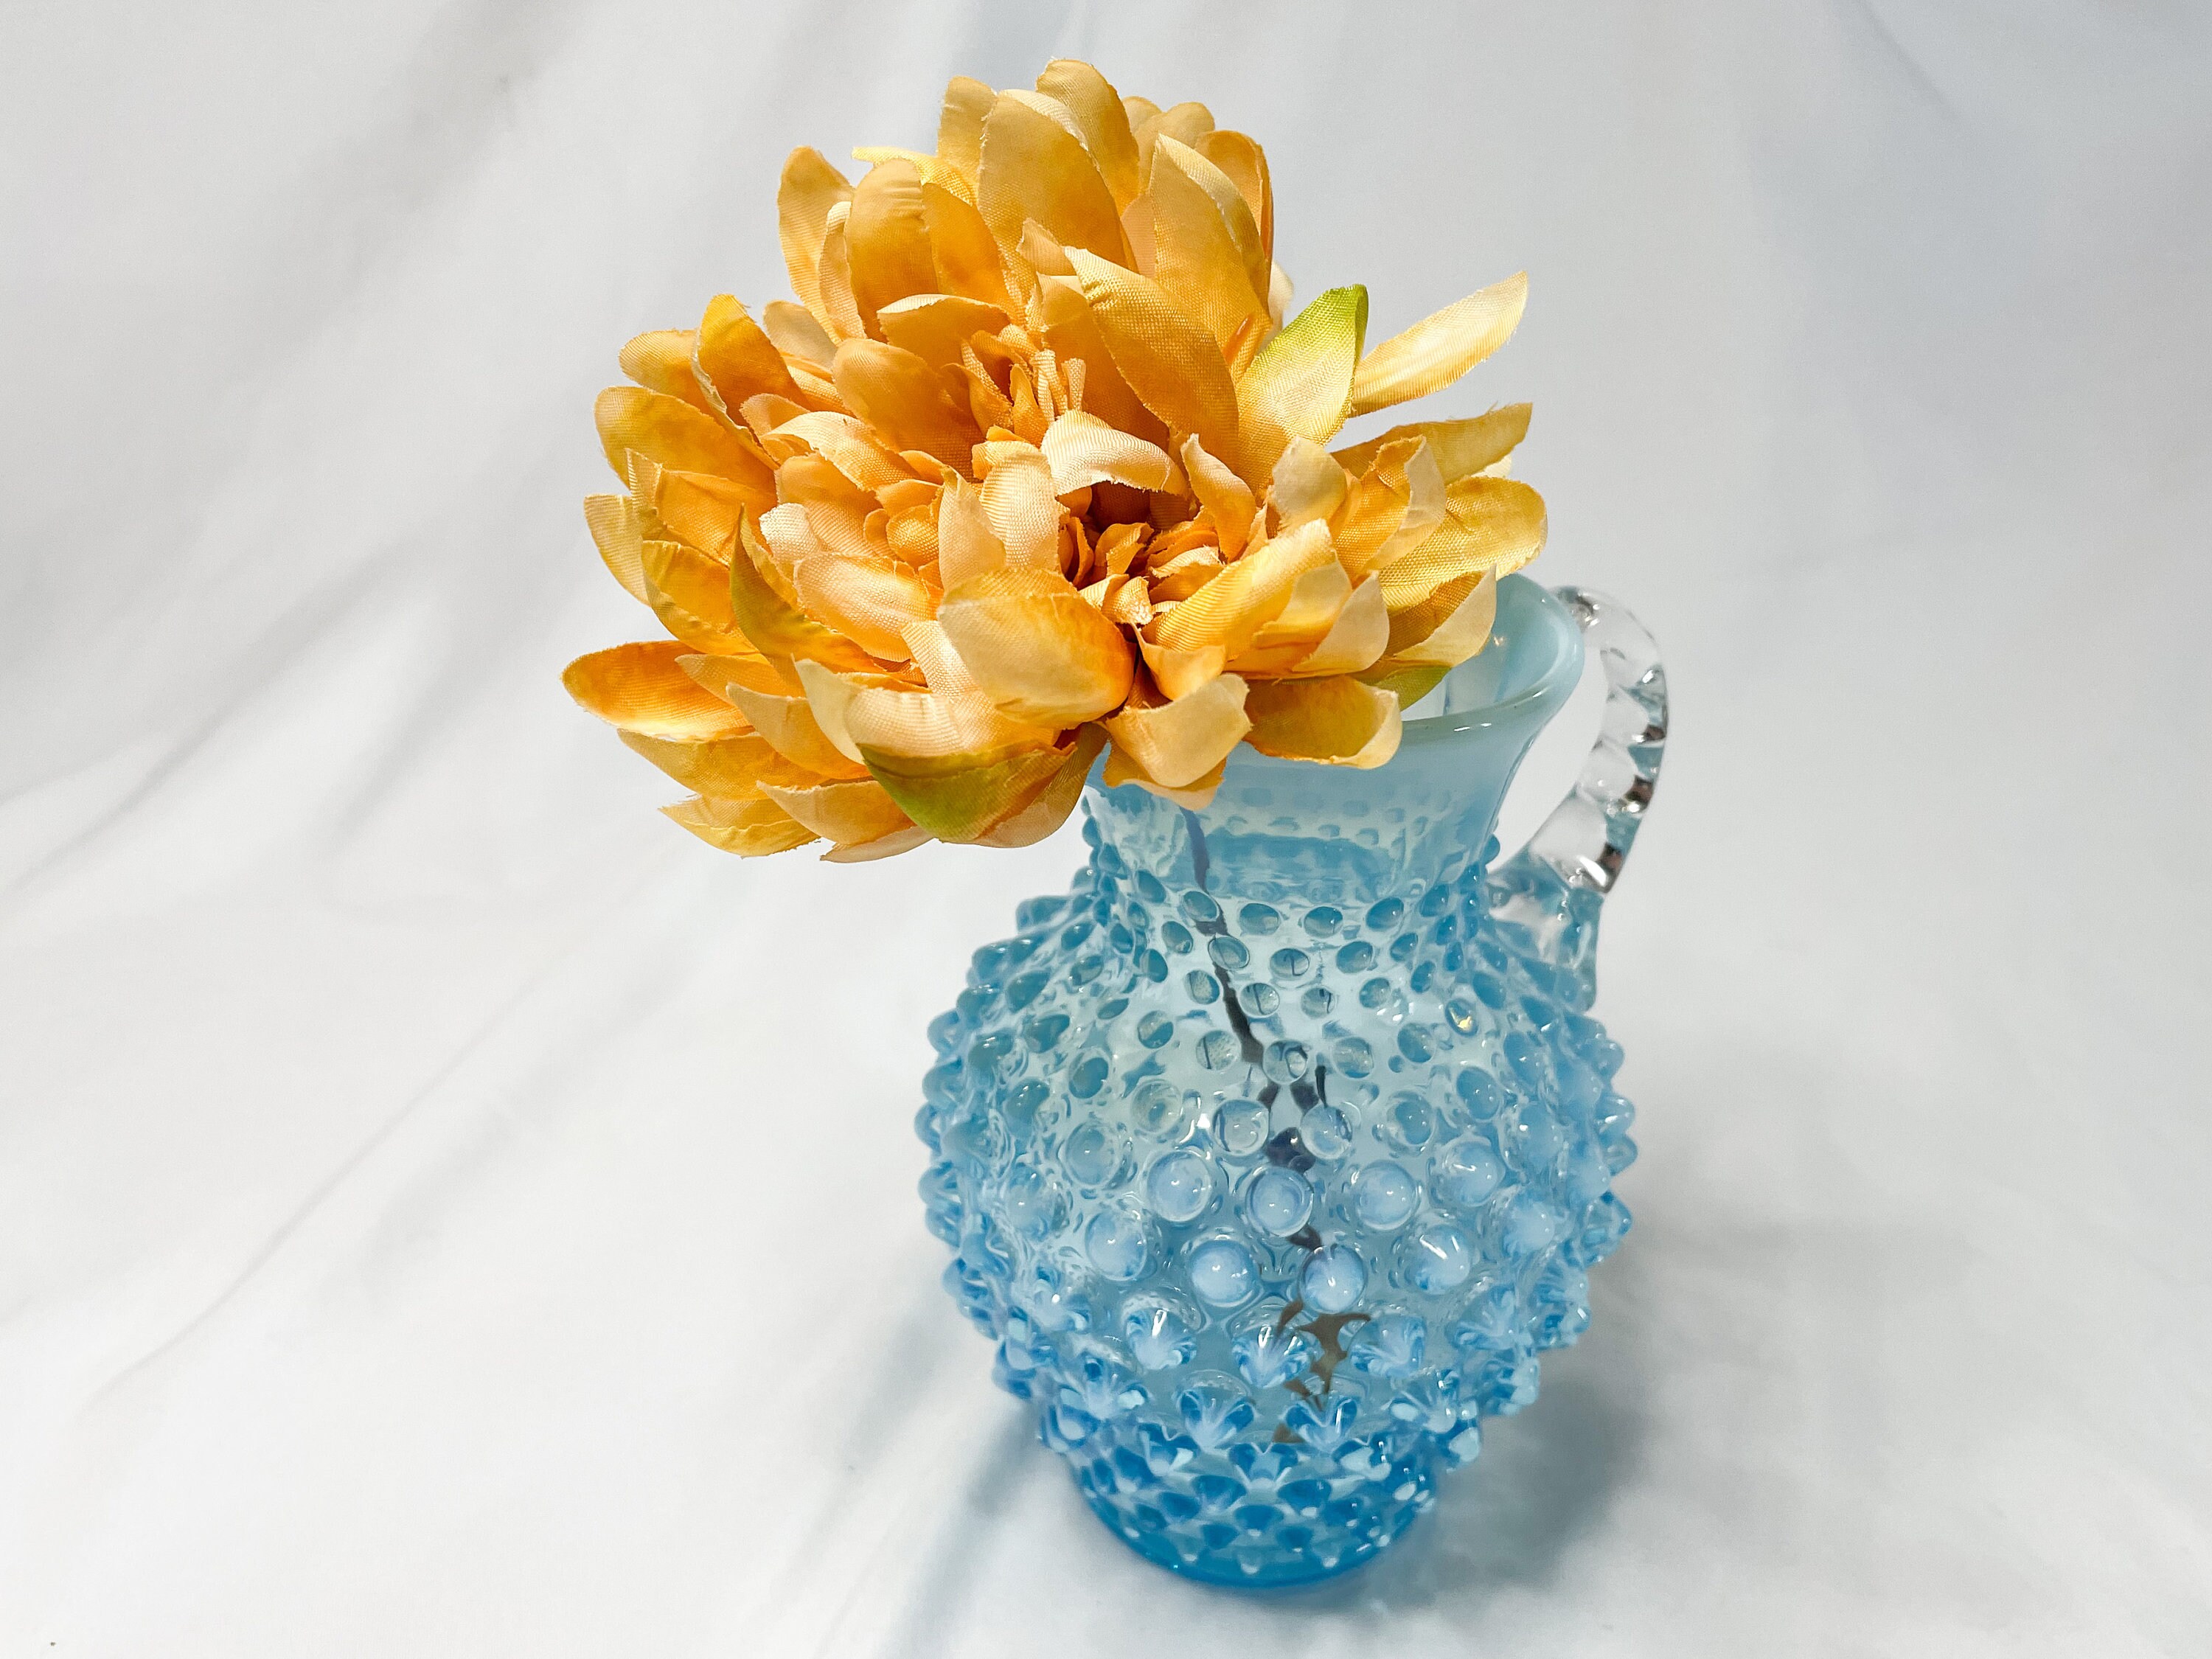 Teal Hobnail Diamond Glass Decorative Storage Container